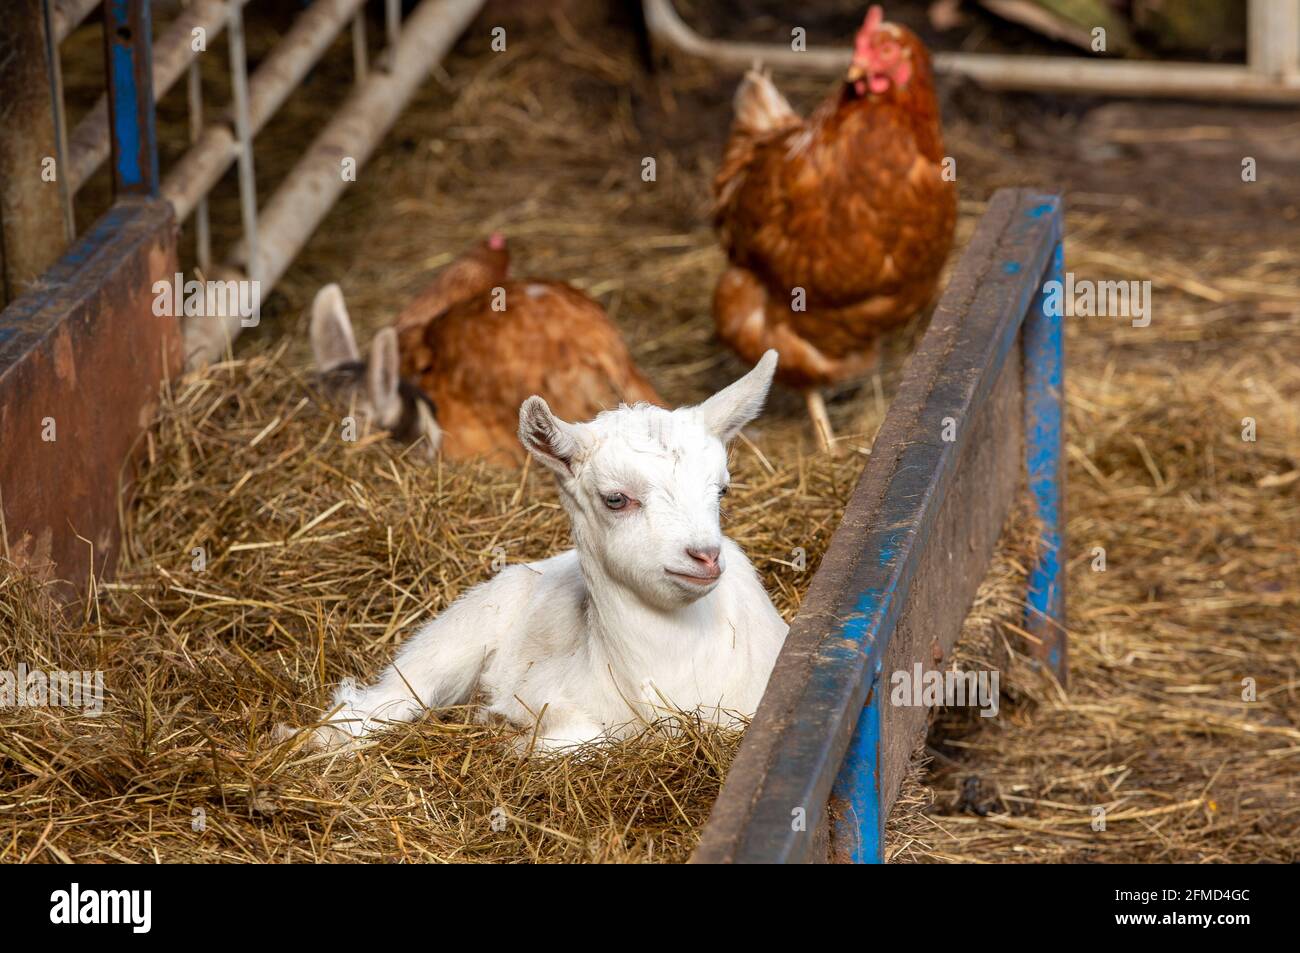 A goat kid and hens, Cumbria, UK. Stock Photo